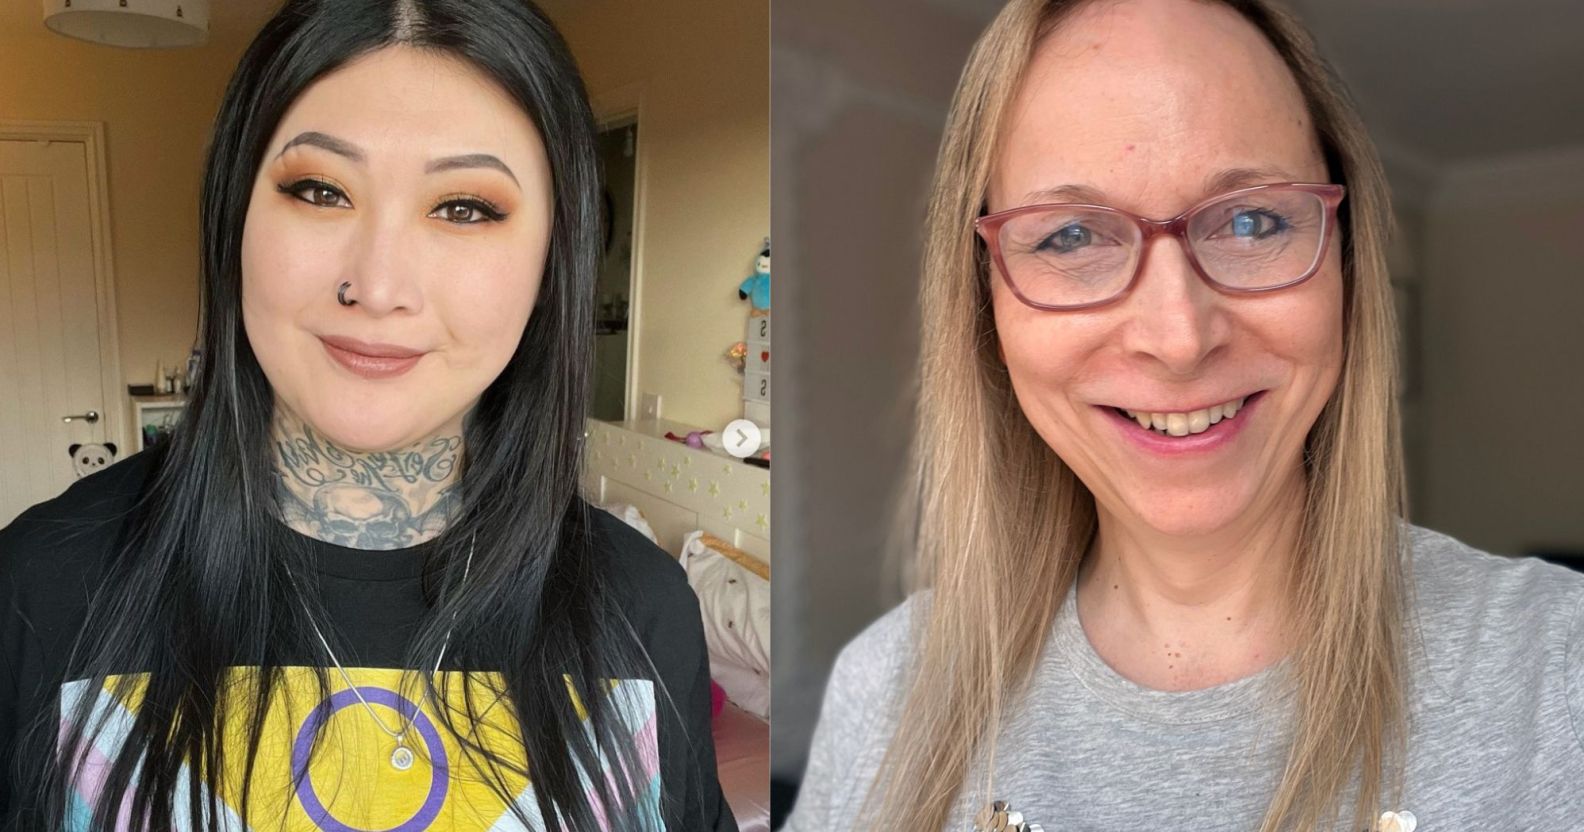 Side by side images of trans advocates Eva Echo and Katie Neeves. Eva is wearing a black top that shows the trans flag, and Katie is wearing glasses and a grey top, both are smiling